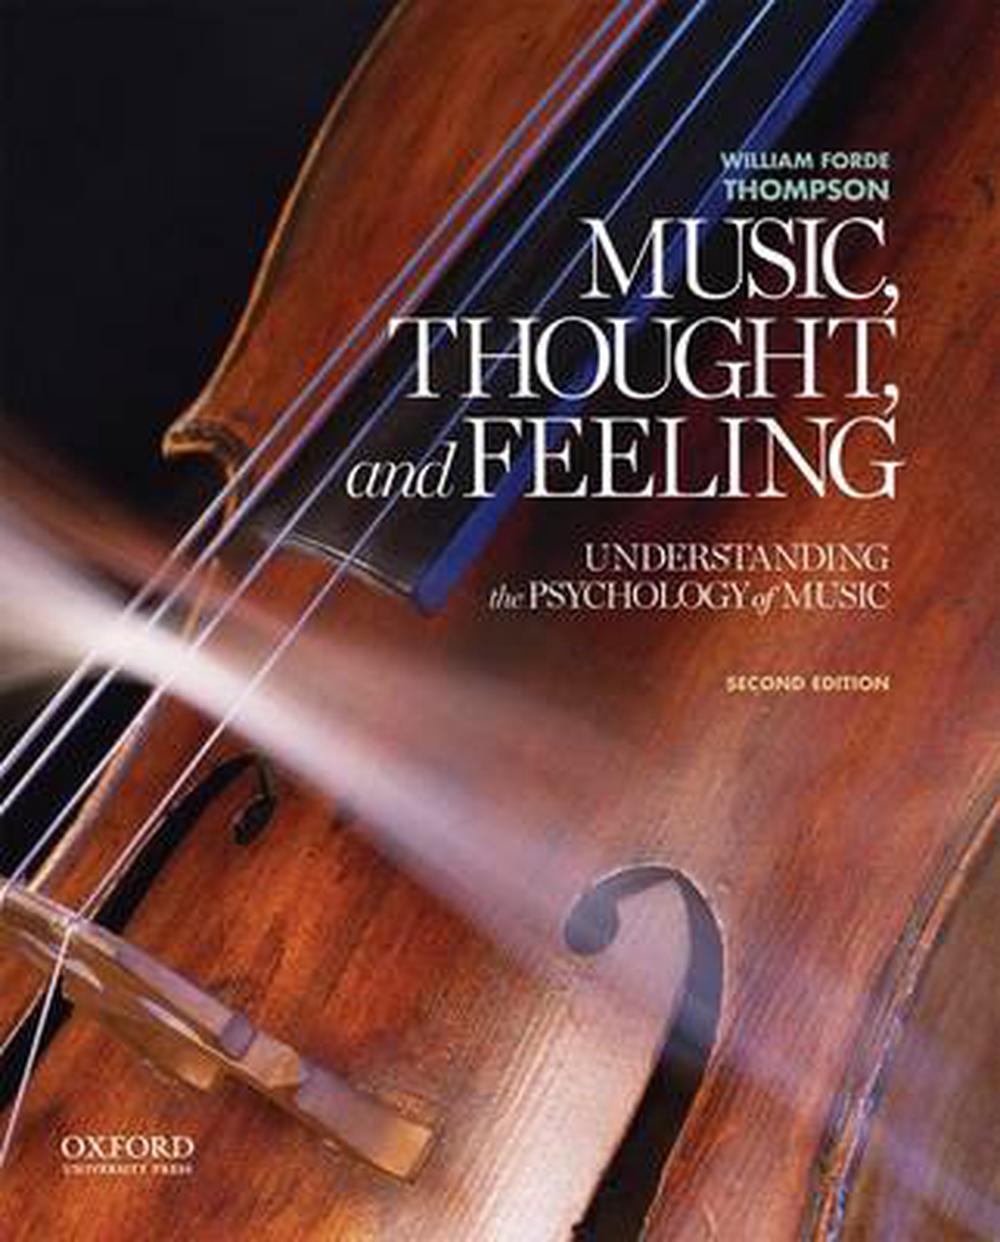 thesis psychology of music